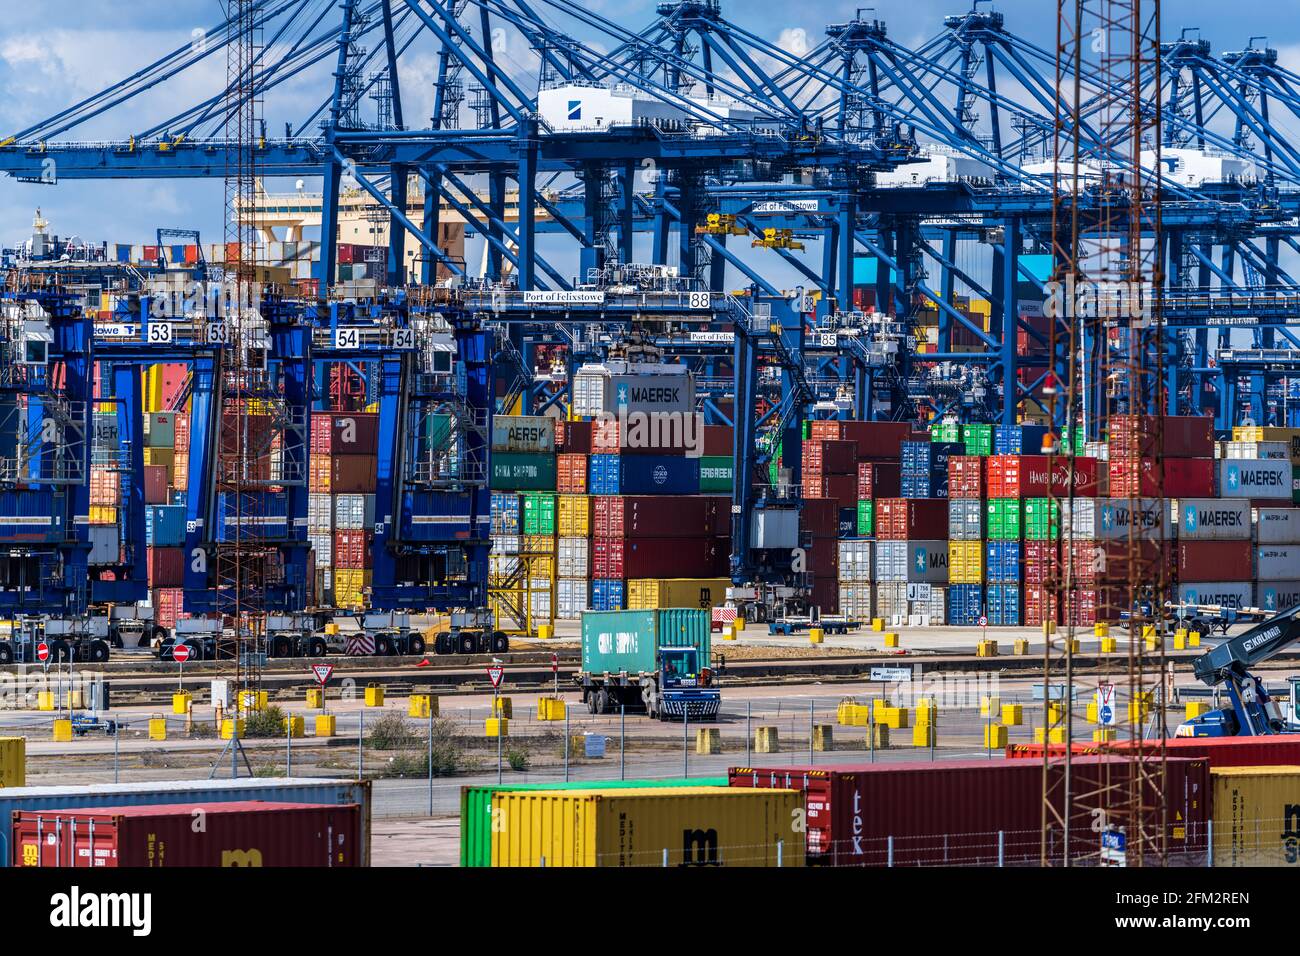 UK Port Congestion - Busy time at Felixstowe Port in the UK as the UK leaves the EU and pandemic shipments increase. Stock Photo